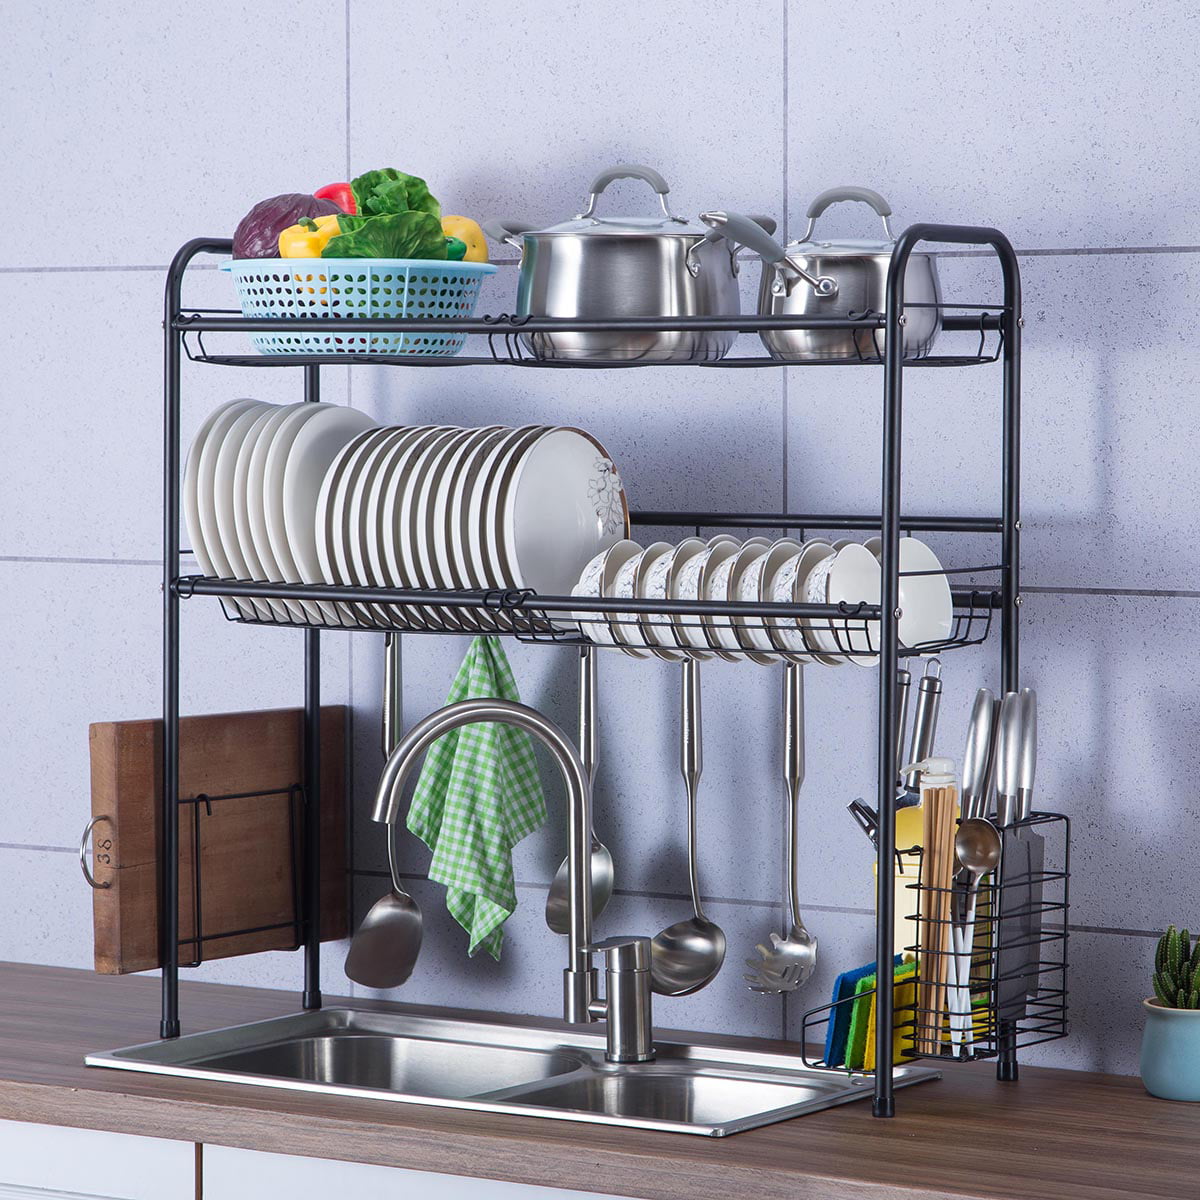 Details about   Over Sink Dish Drying Rack Drainer Stainless Steel Kitchen Cutlery Holder US HOT 